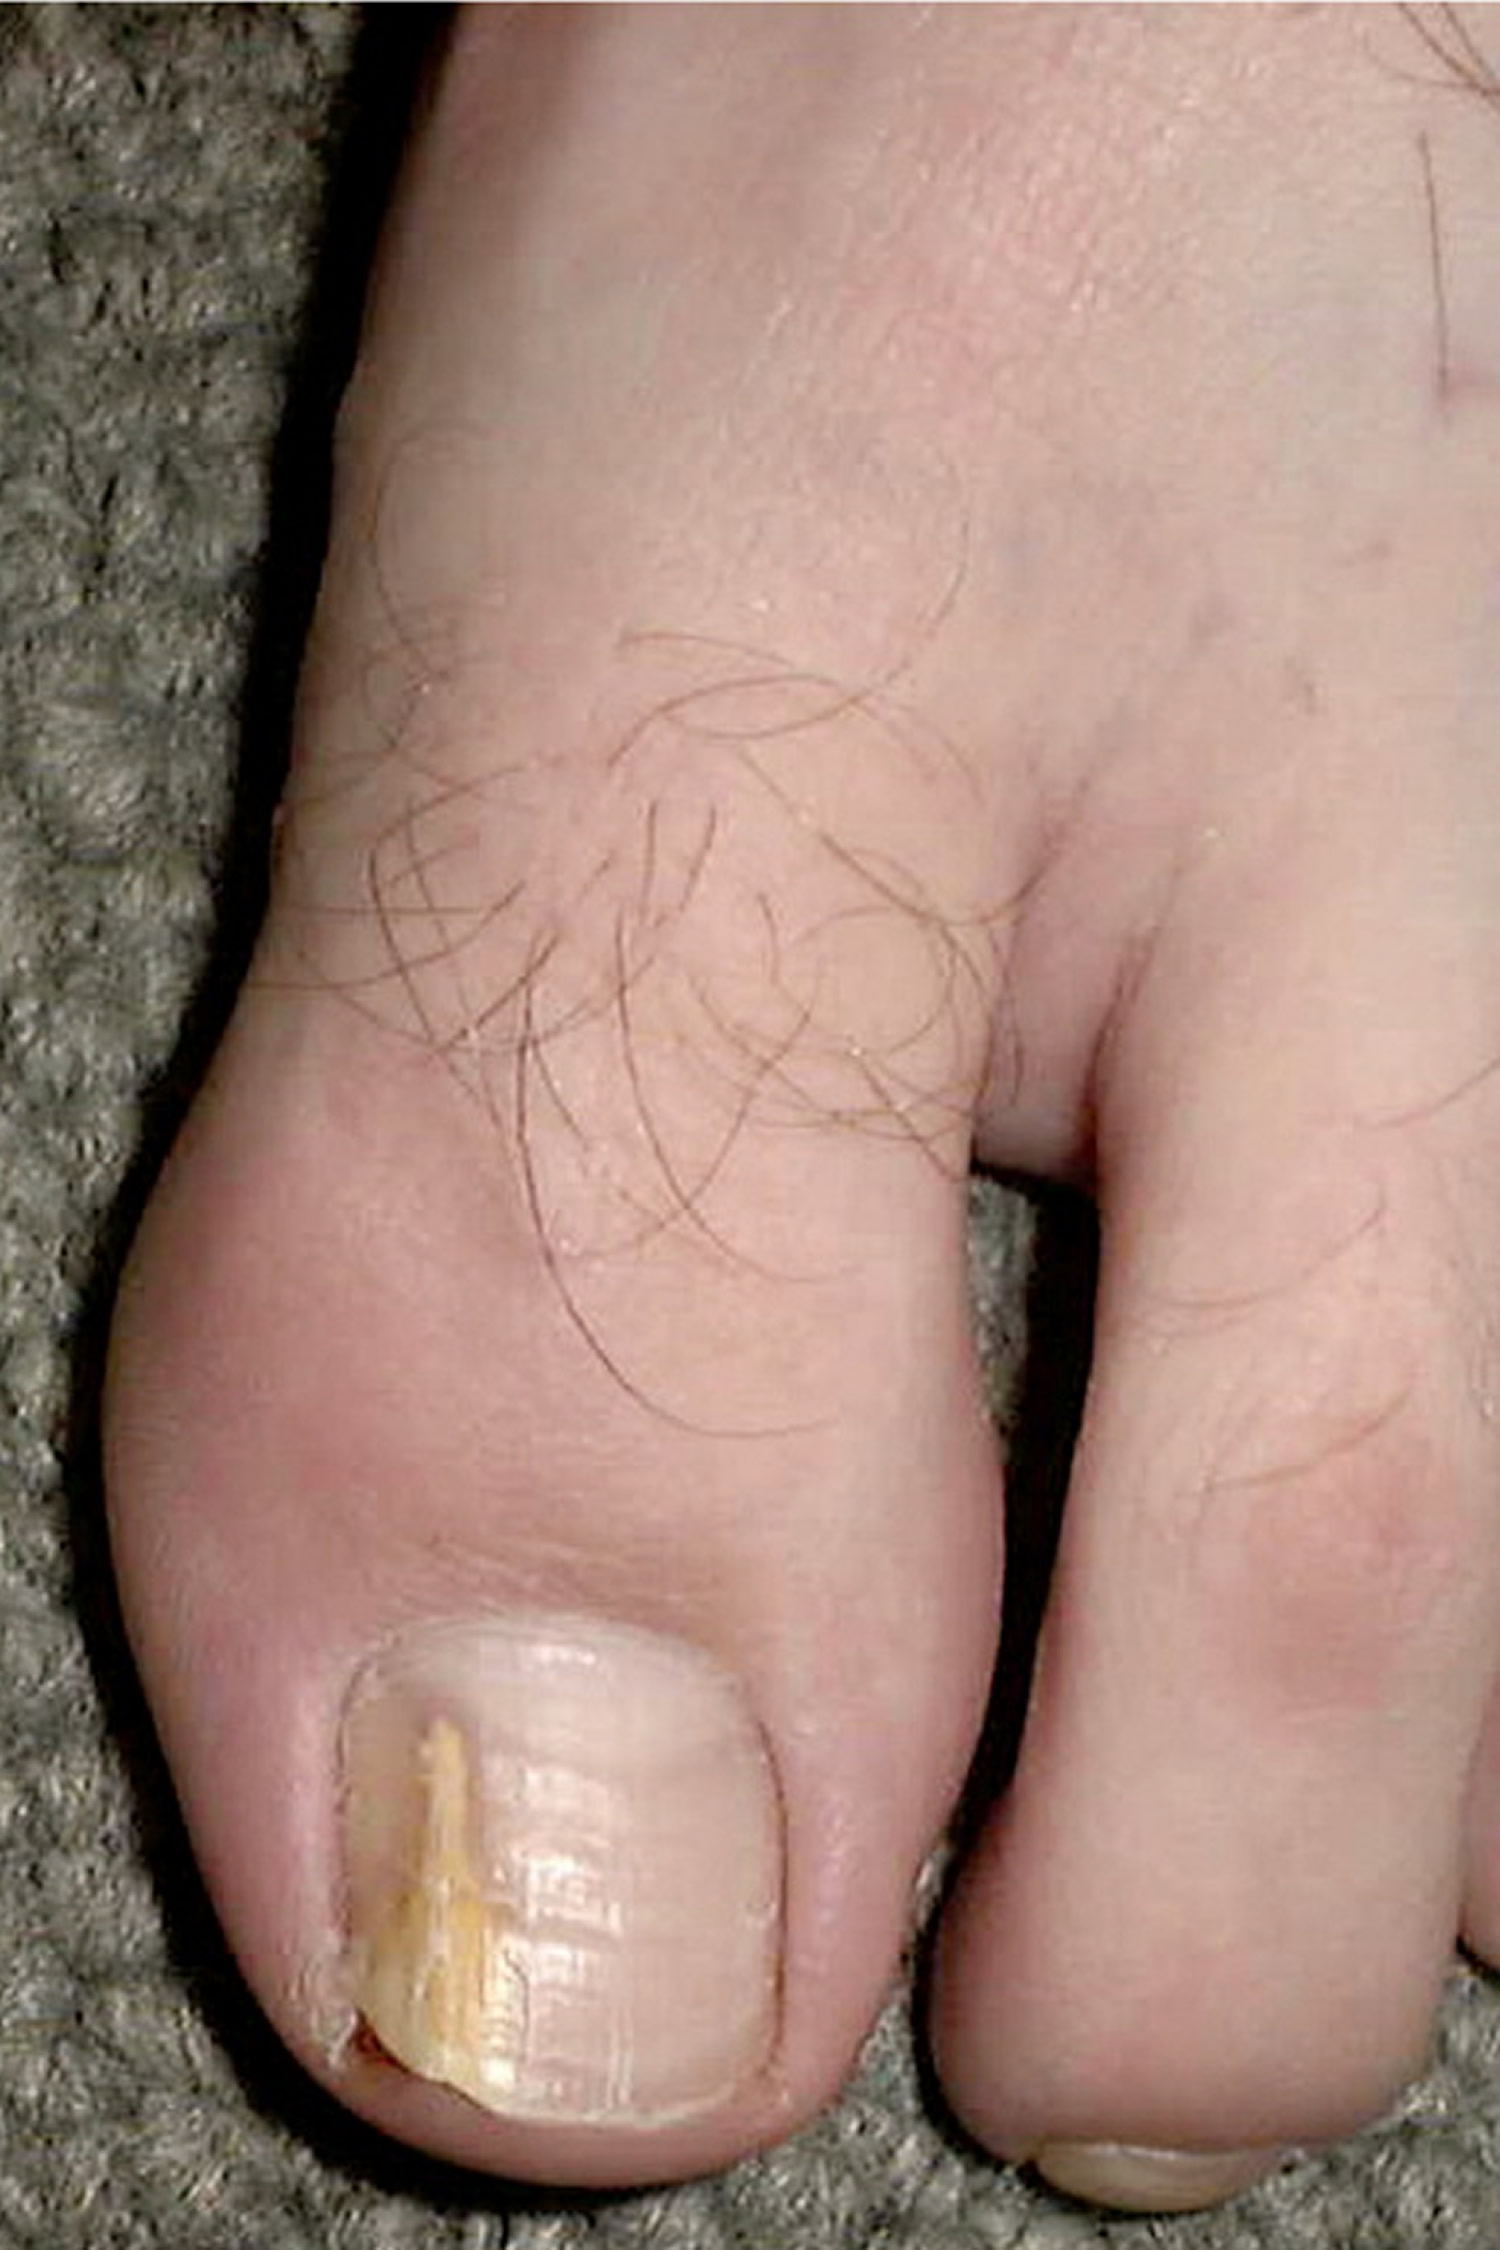 Distal and lateral subungual onychomycosis with spike deformity